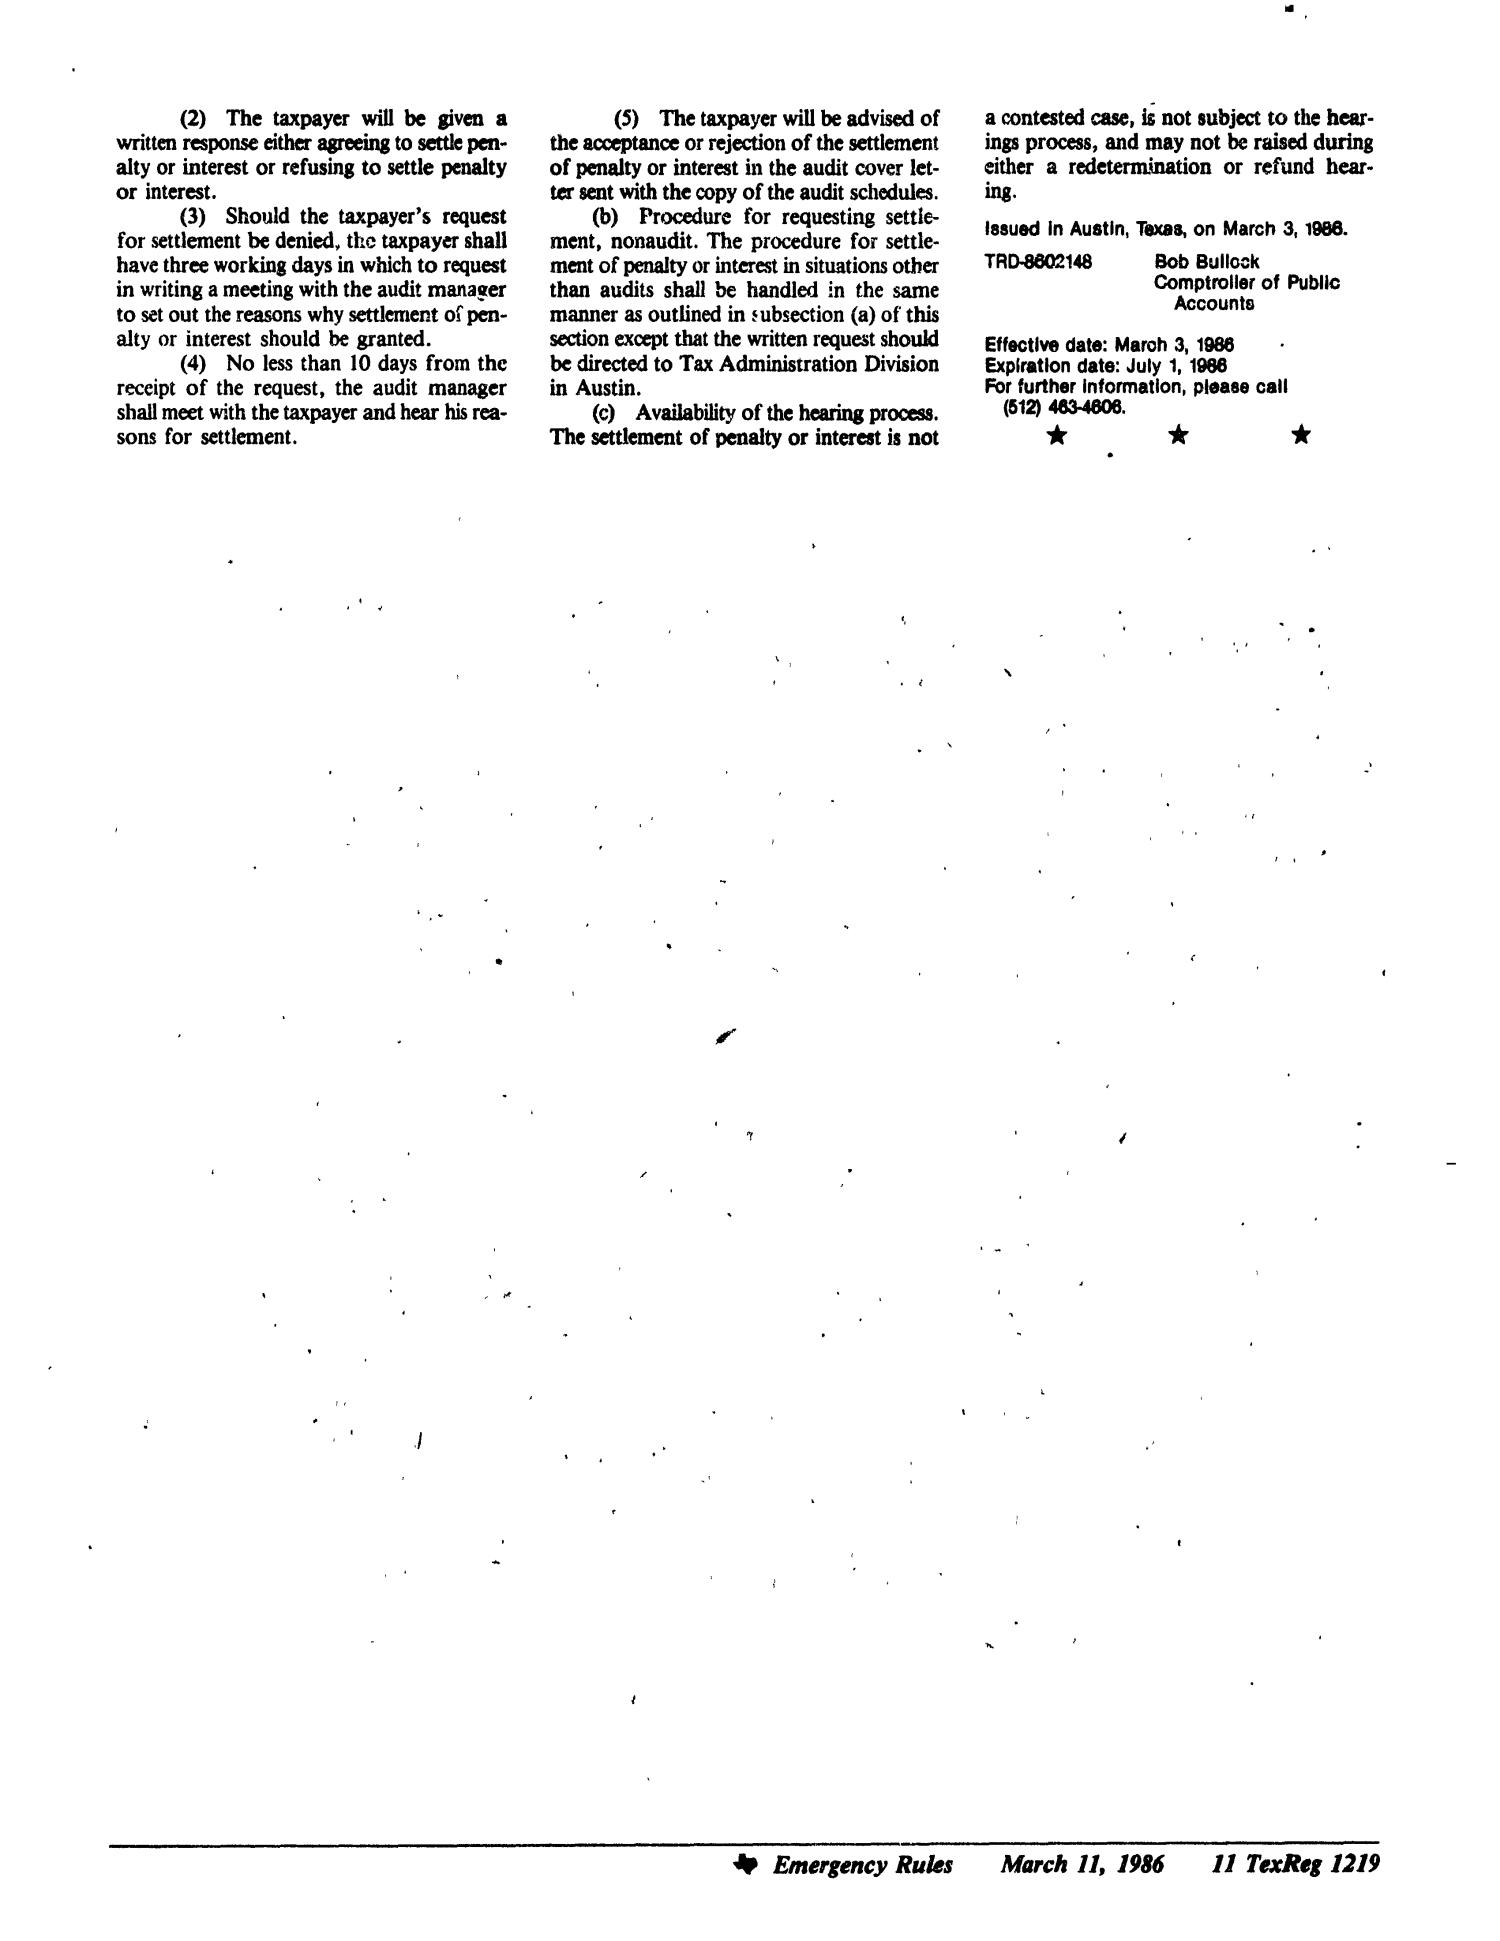 Texas Register, Volume 11, Number 19, Pages 1163-1244, March 11, 1986
                                                
                                                    1219
                                                